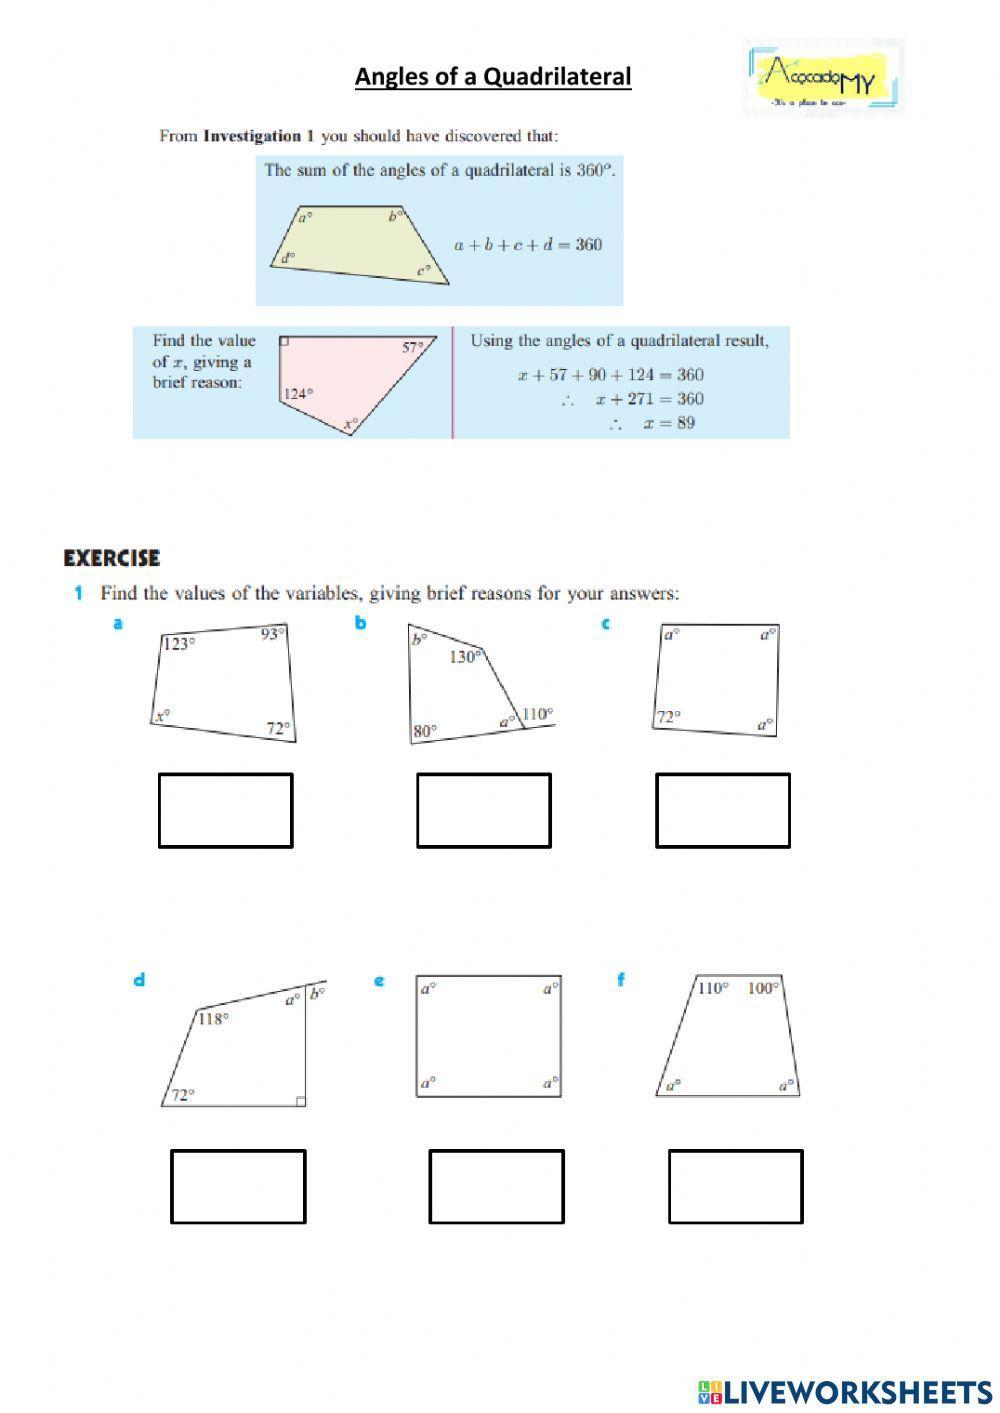 Angles of Quadrilateral